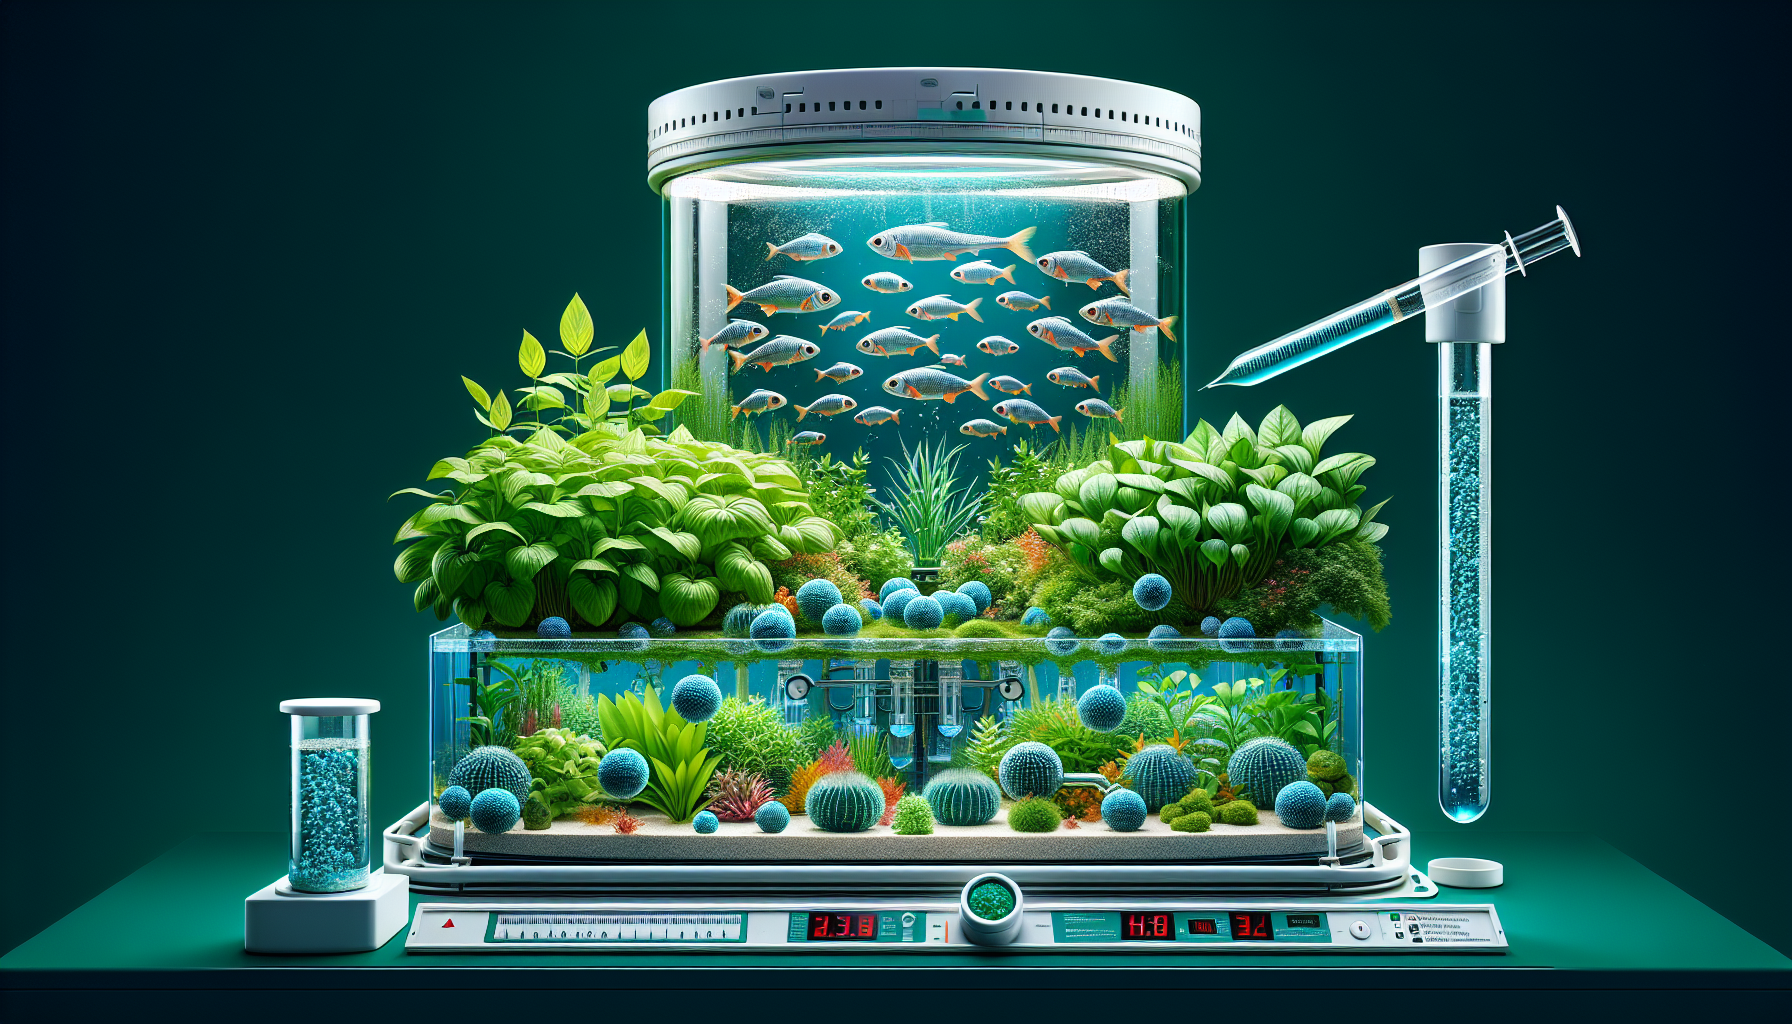 Managing Nutrient Levels In Aquaponic Systems